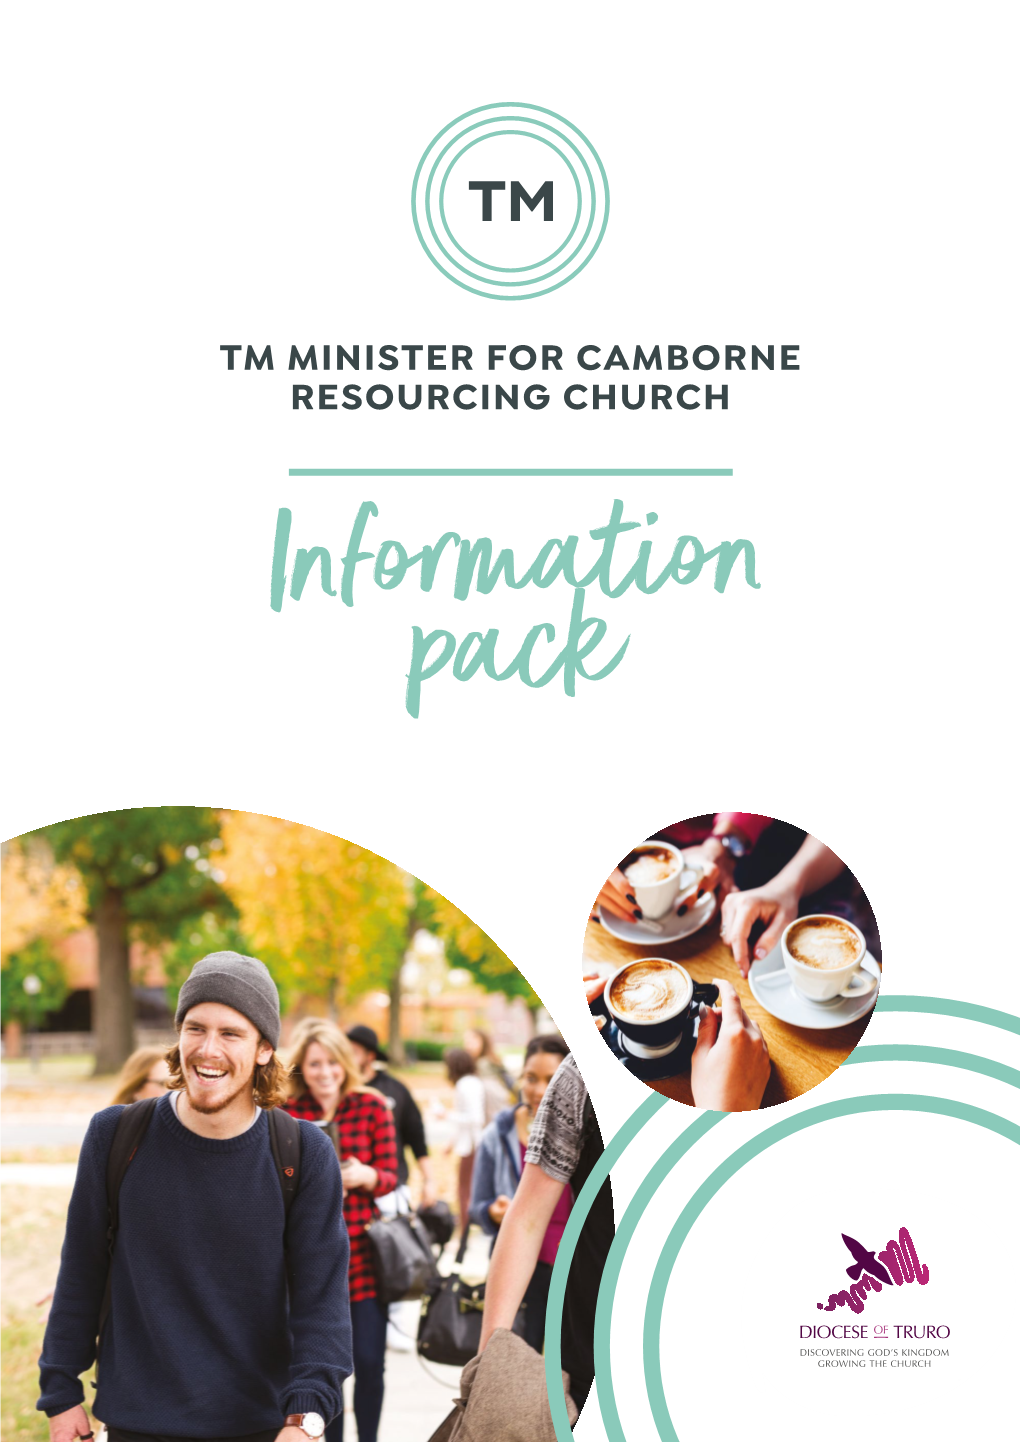 TM MINISTER for CAMBORNE RESOURCING CHURCH Information Pack Contents